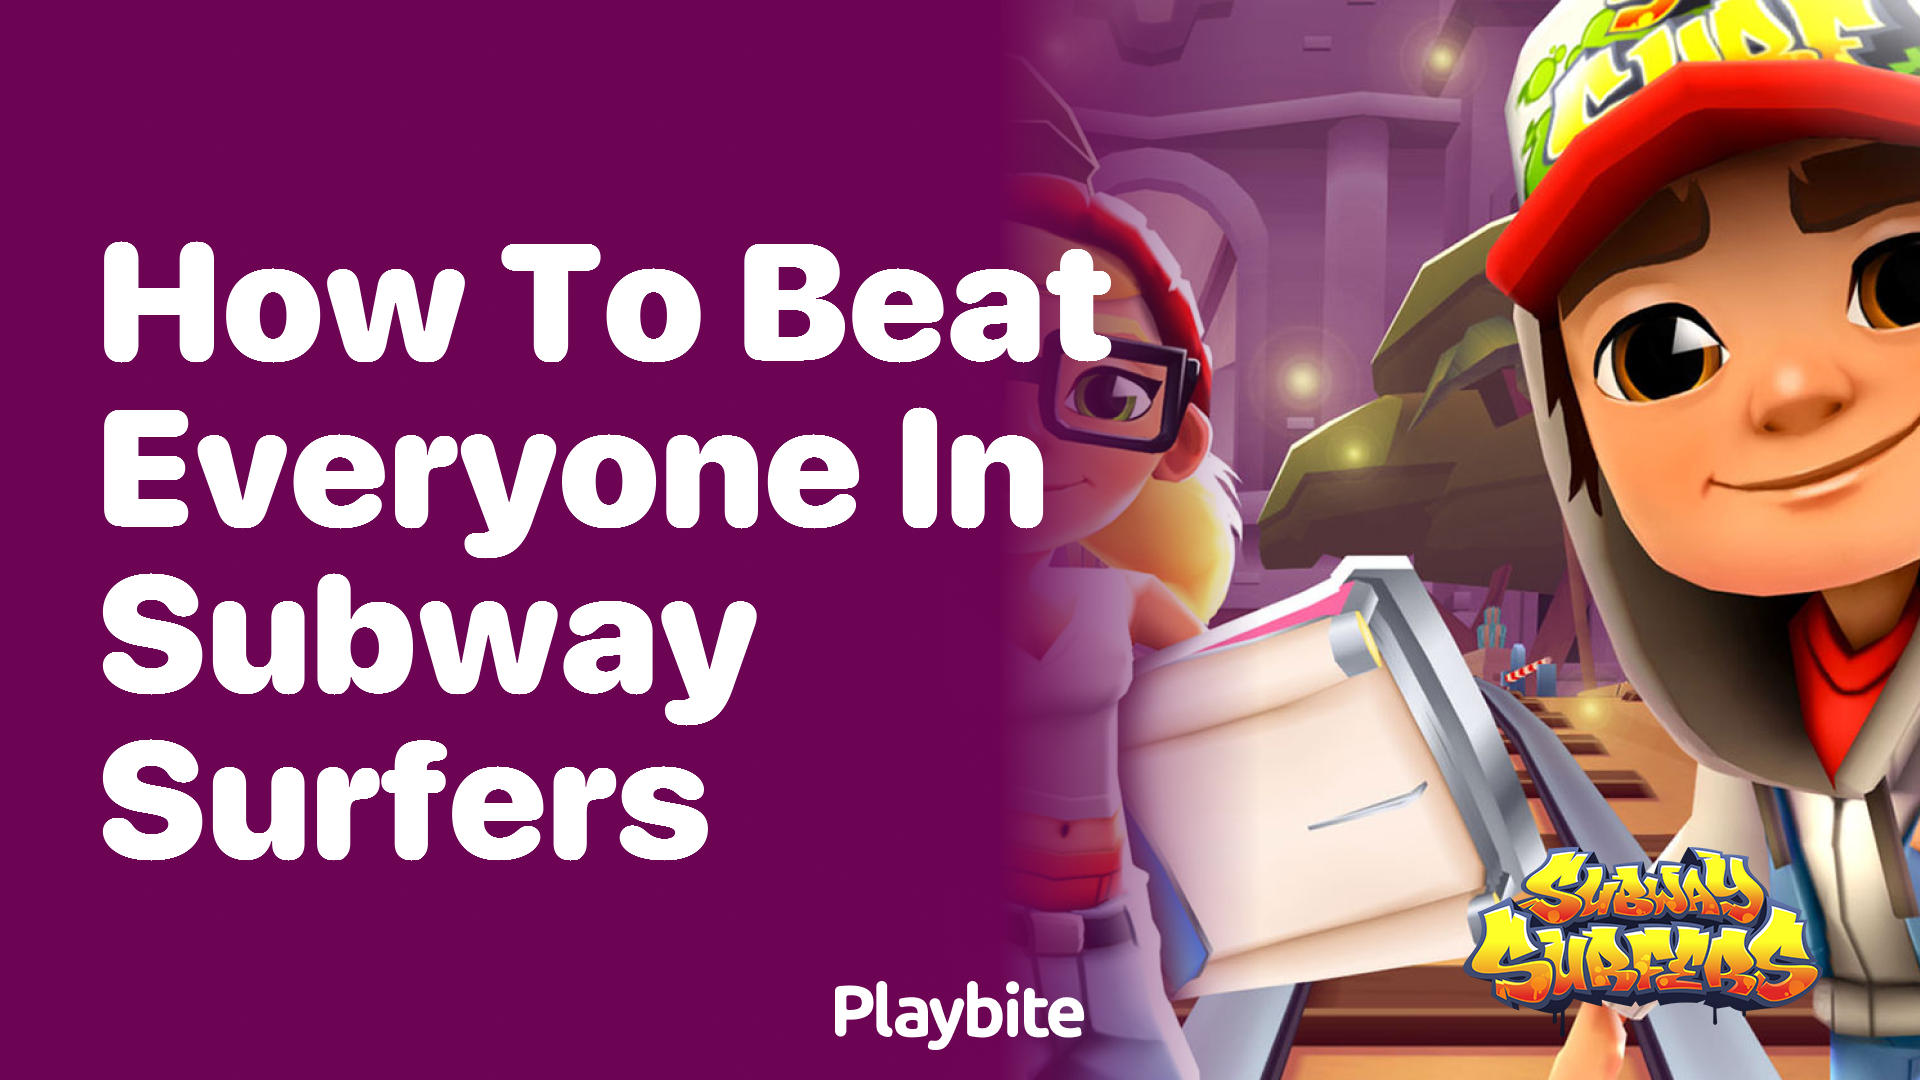 How to Beat Everyone in Subway Surfers